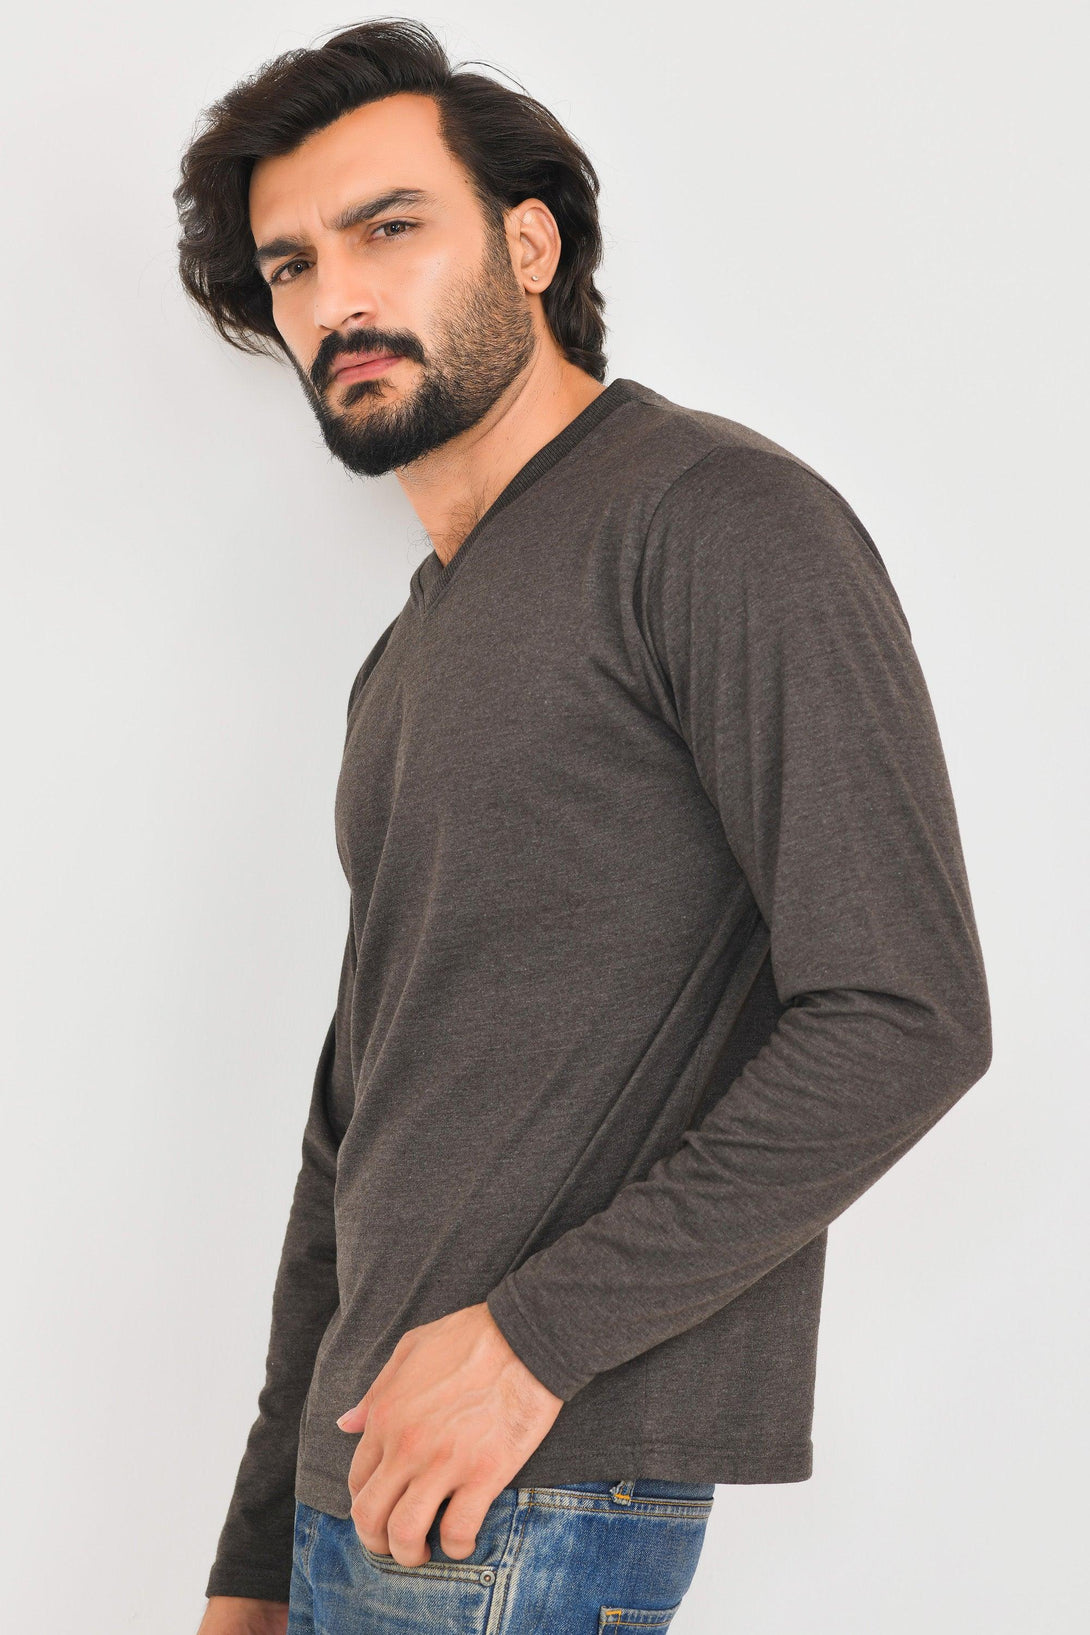 V-Neck Long Sleeve T-Shirts | NAVY - WHITE - CHARCOAL - BLACK - Pack of 4 - FTS